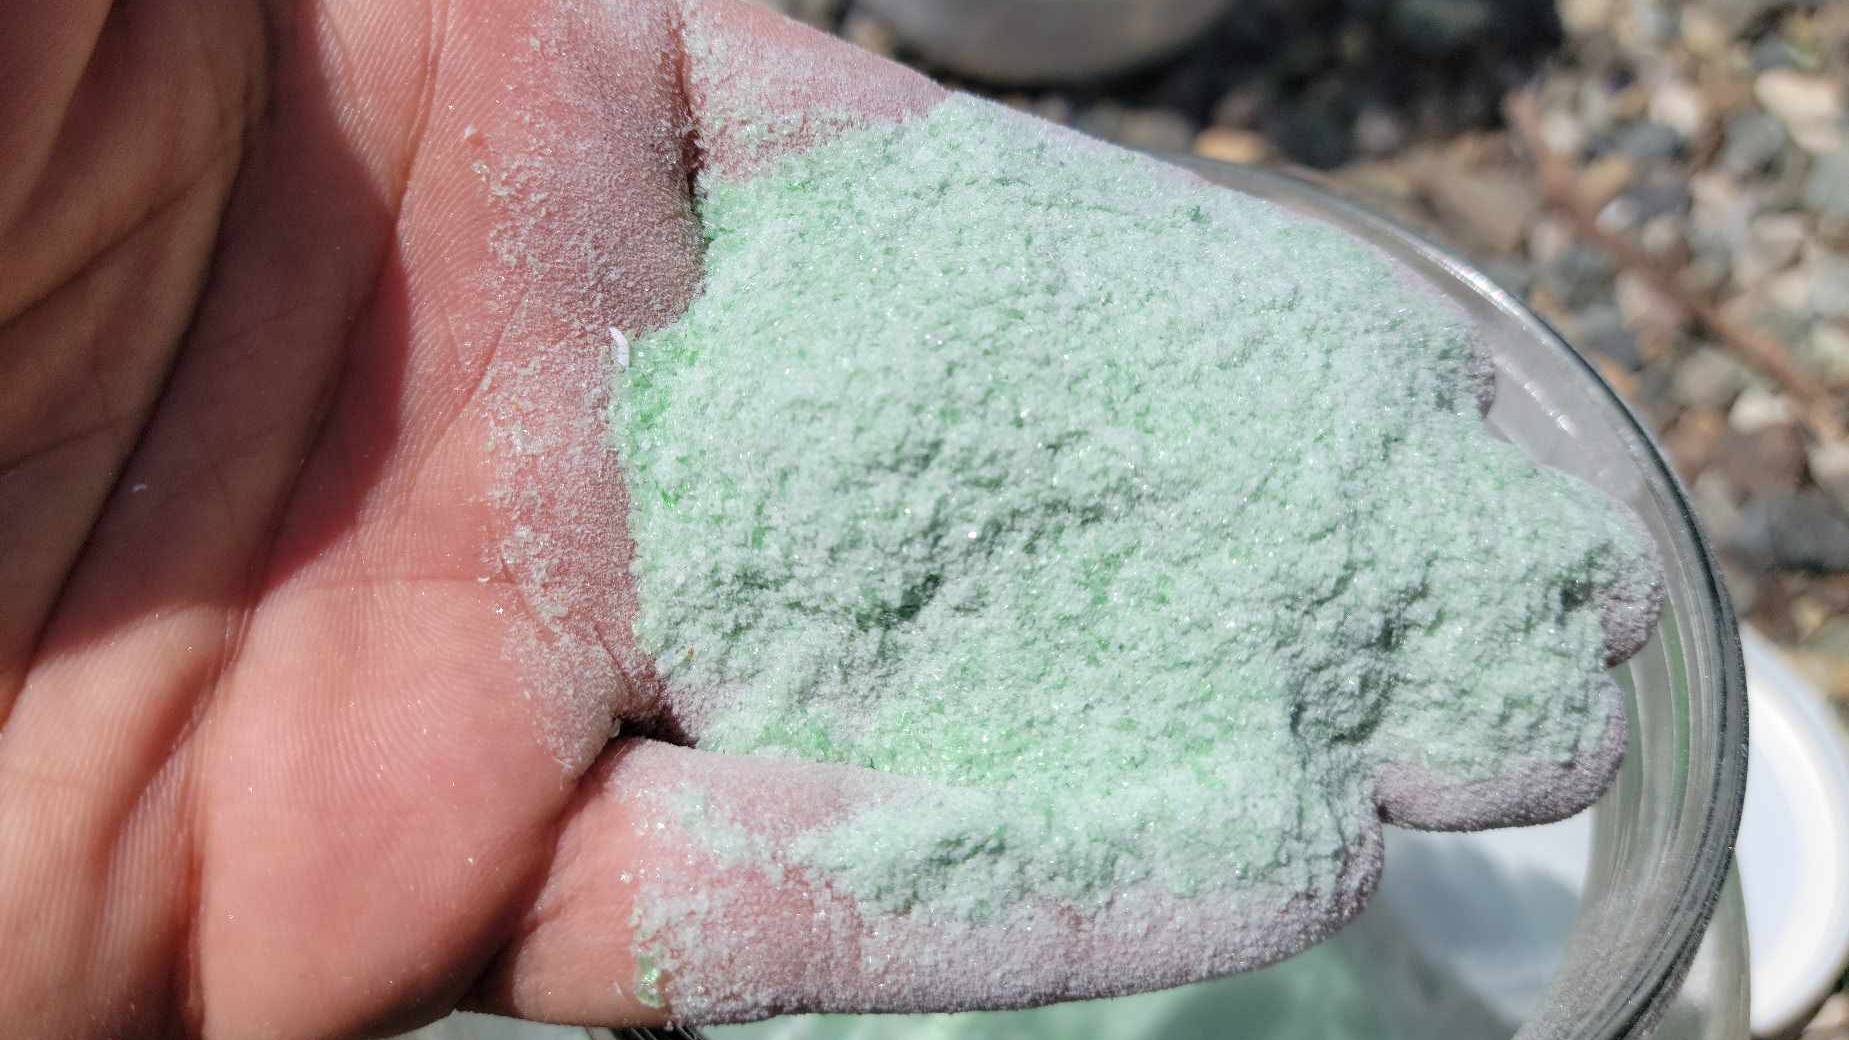 Pulverized glass (green sand)